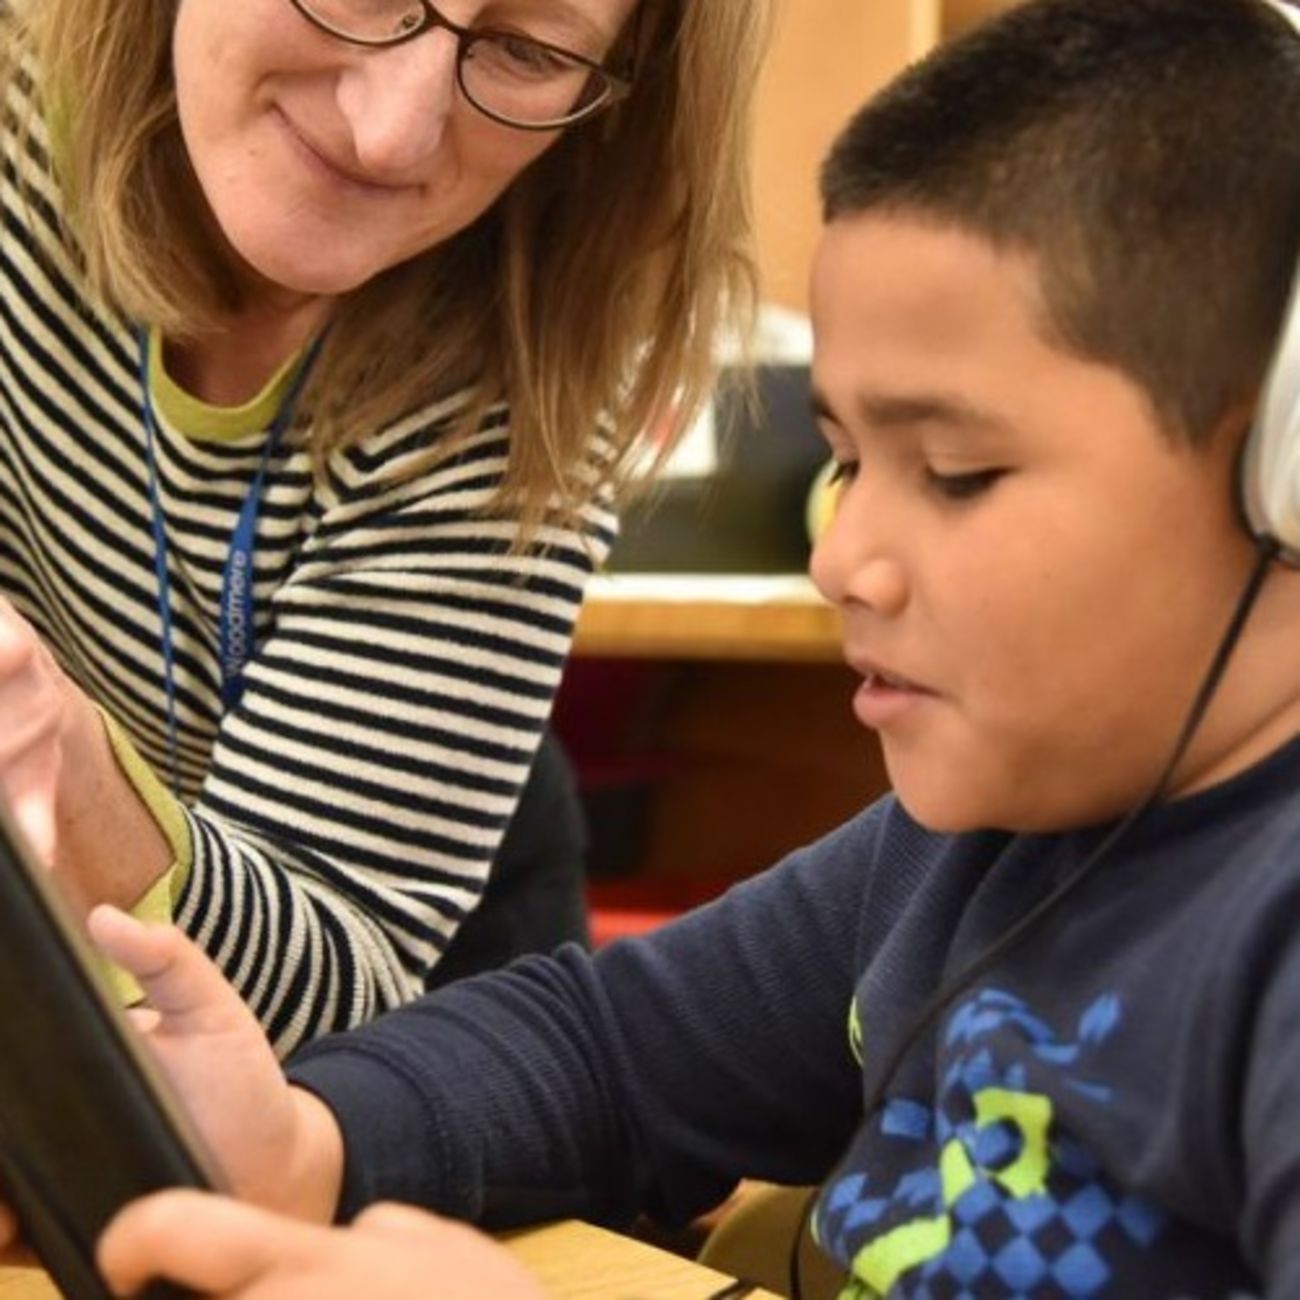 Help Create Audiobooks to Support Student Literacy During COVID-19